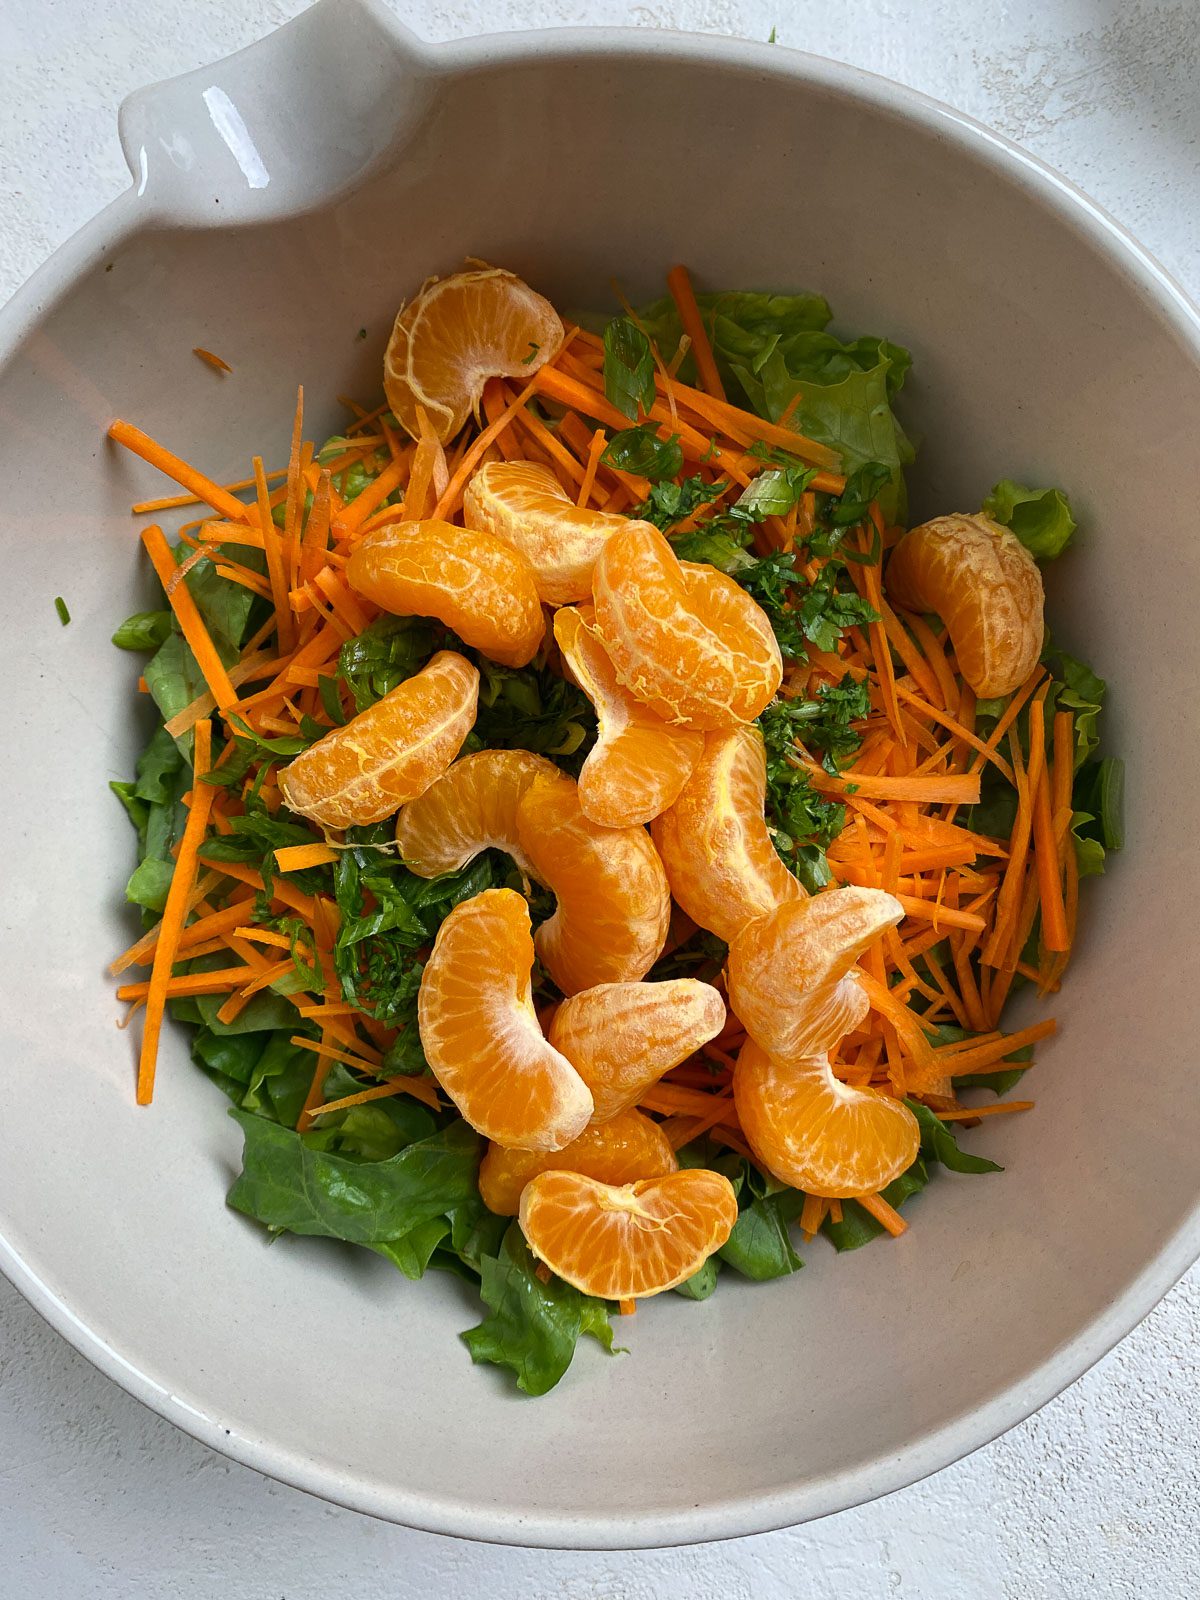 process of mandarin and carrots added to lettuce in white bowl